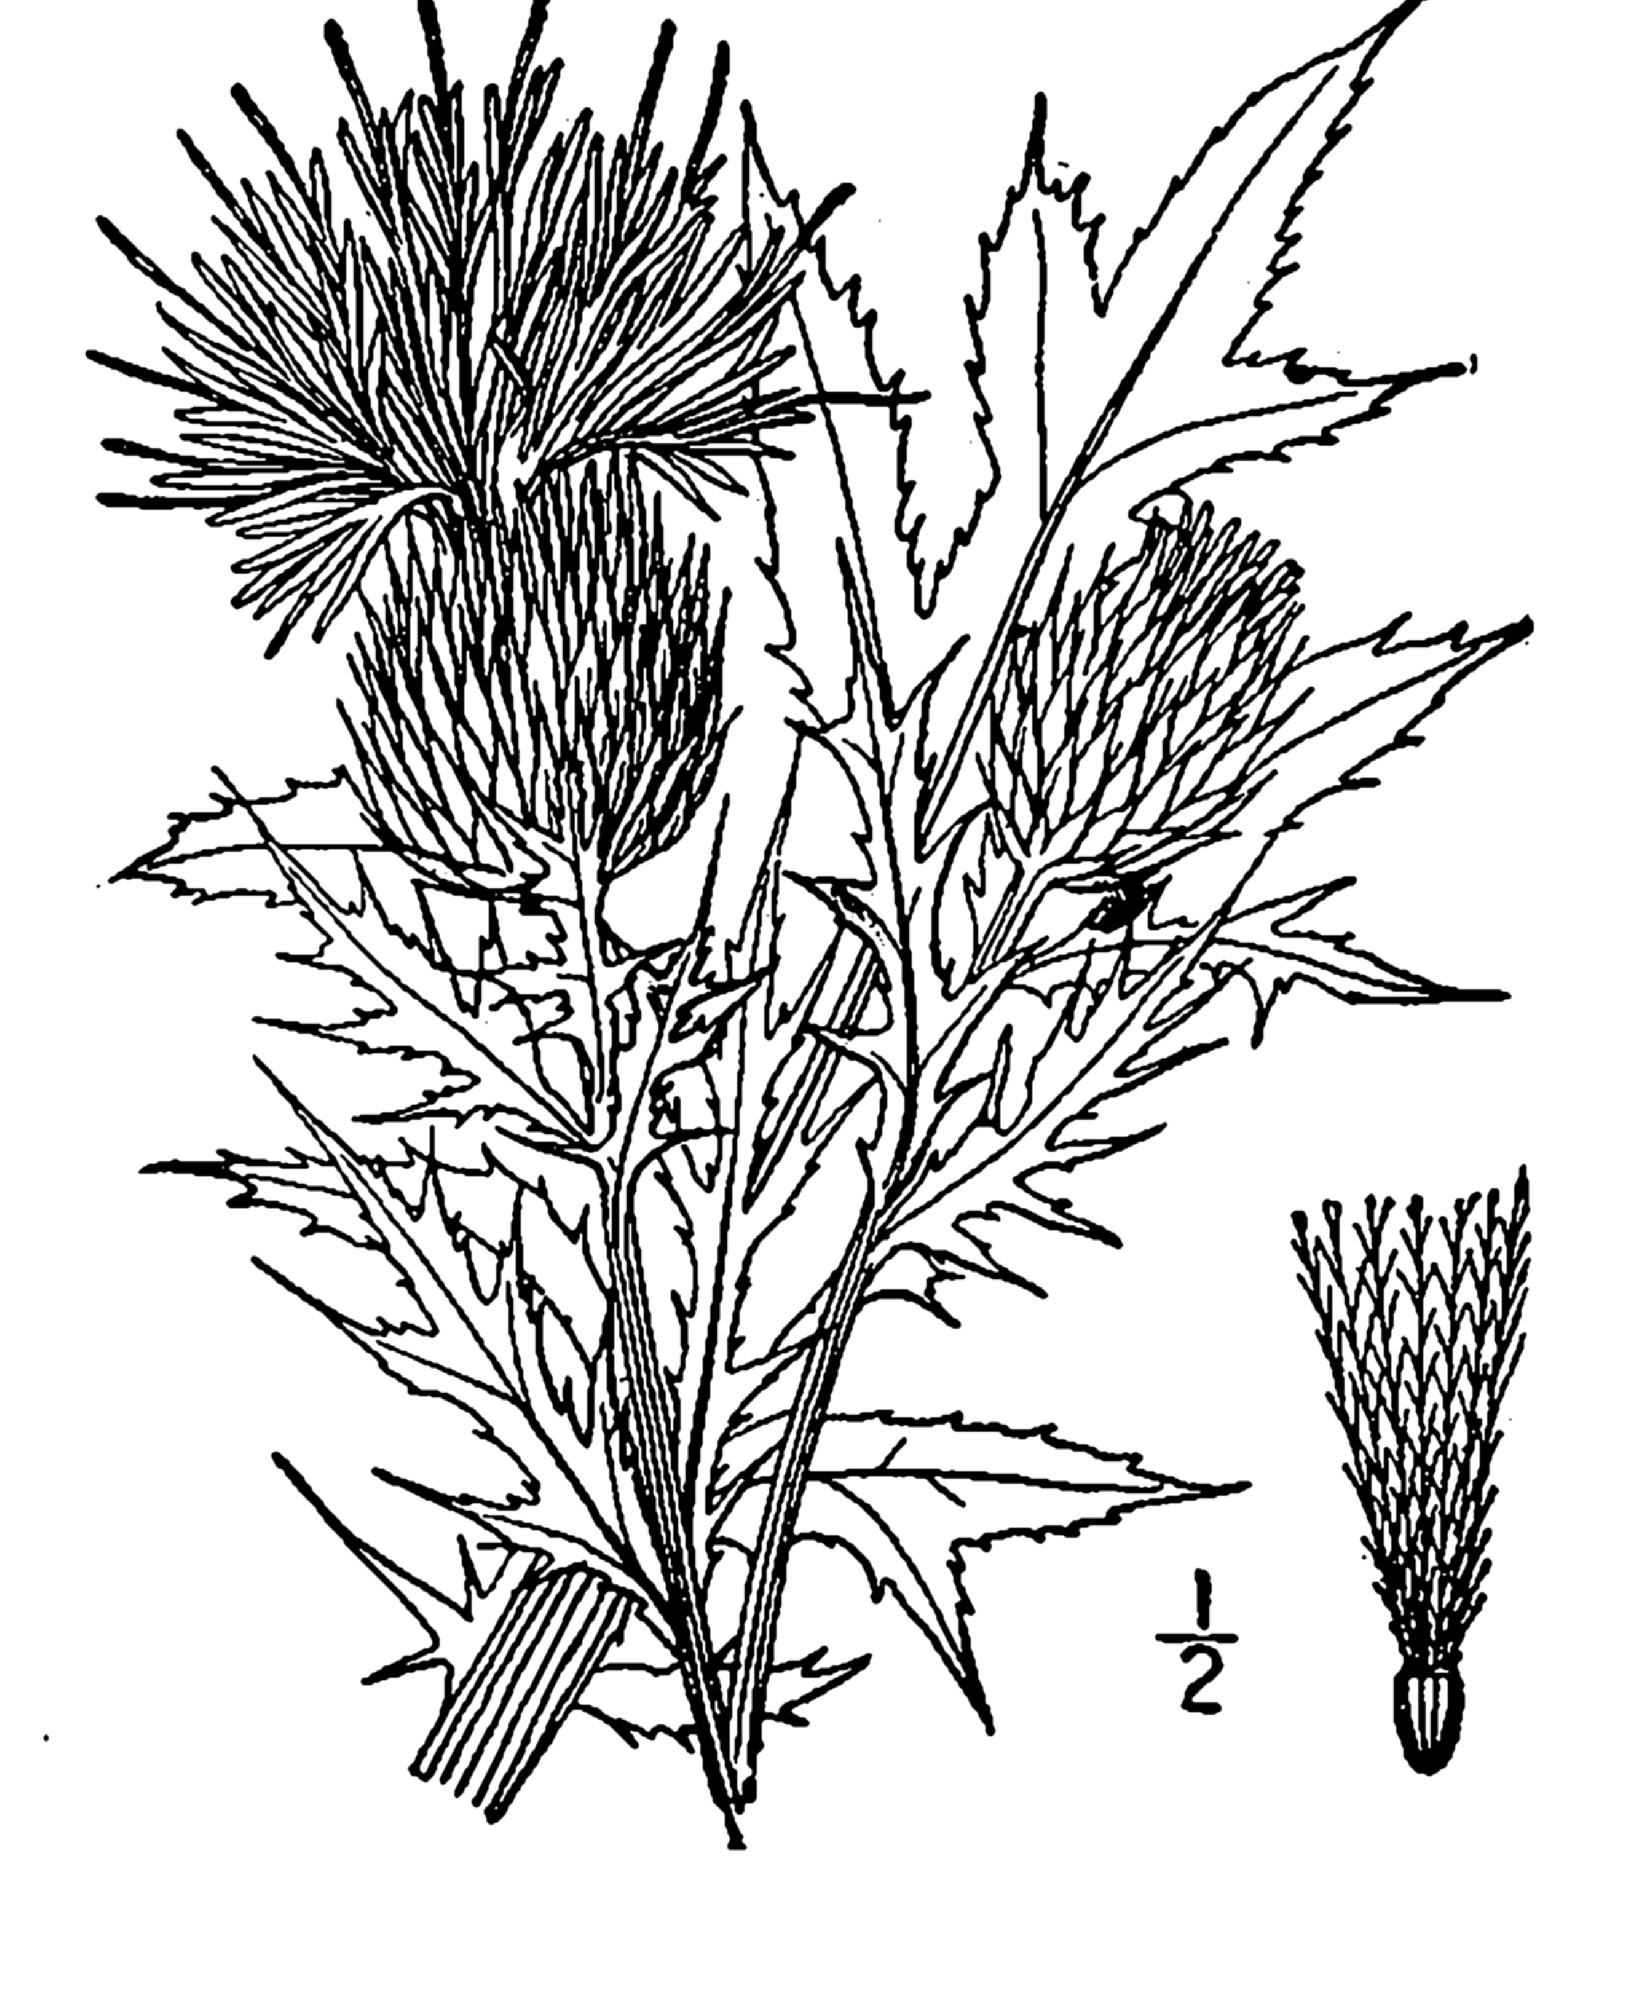 1913 Field Thistle drawing.